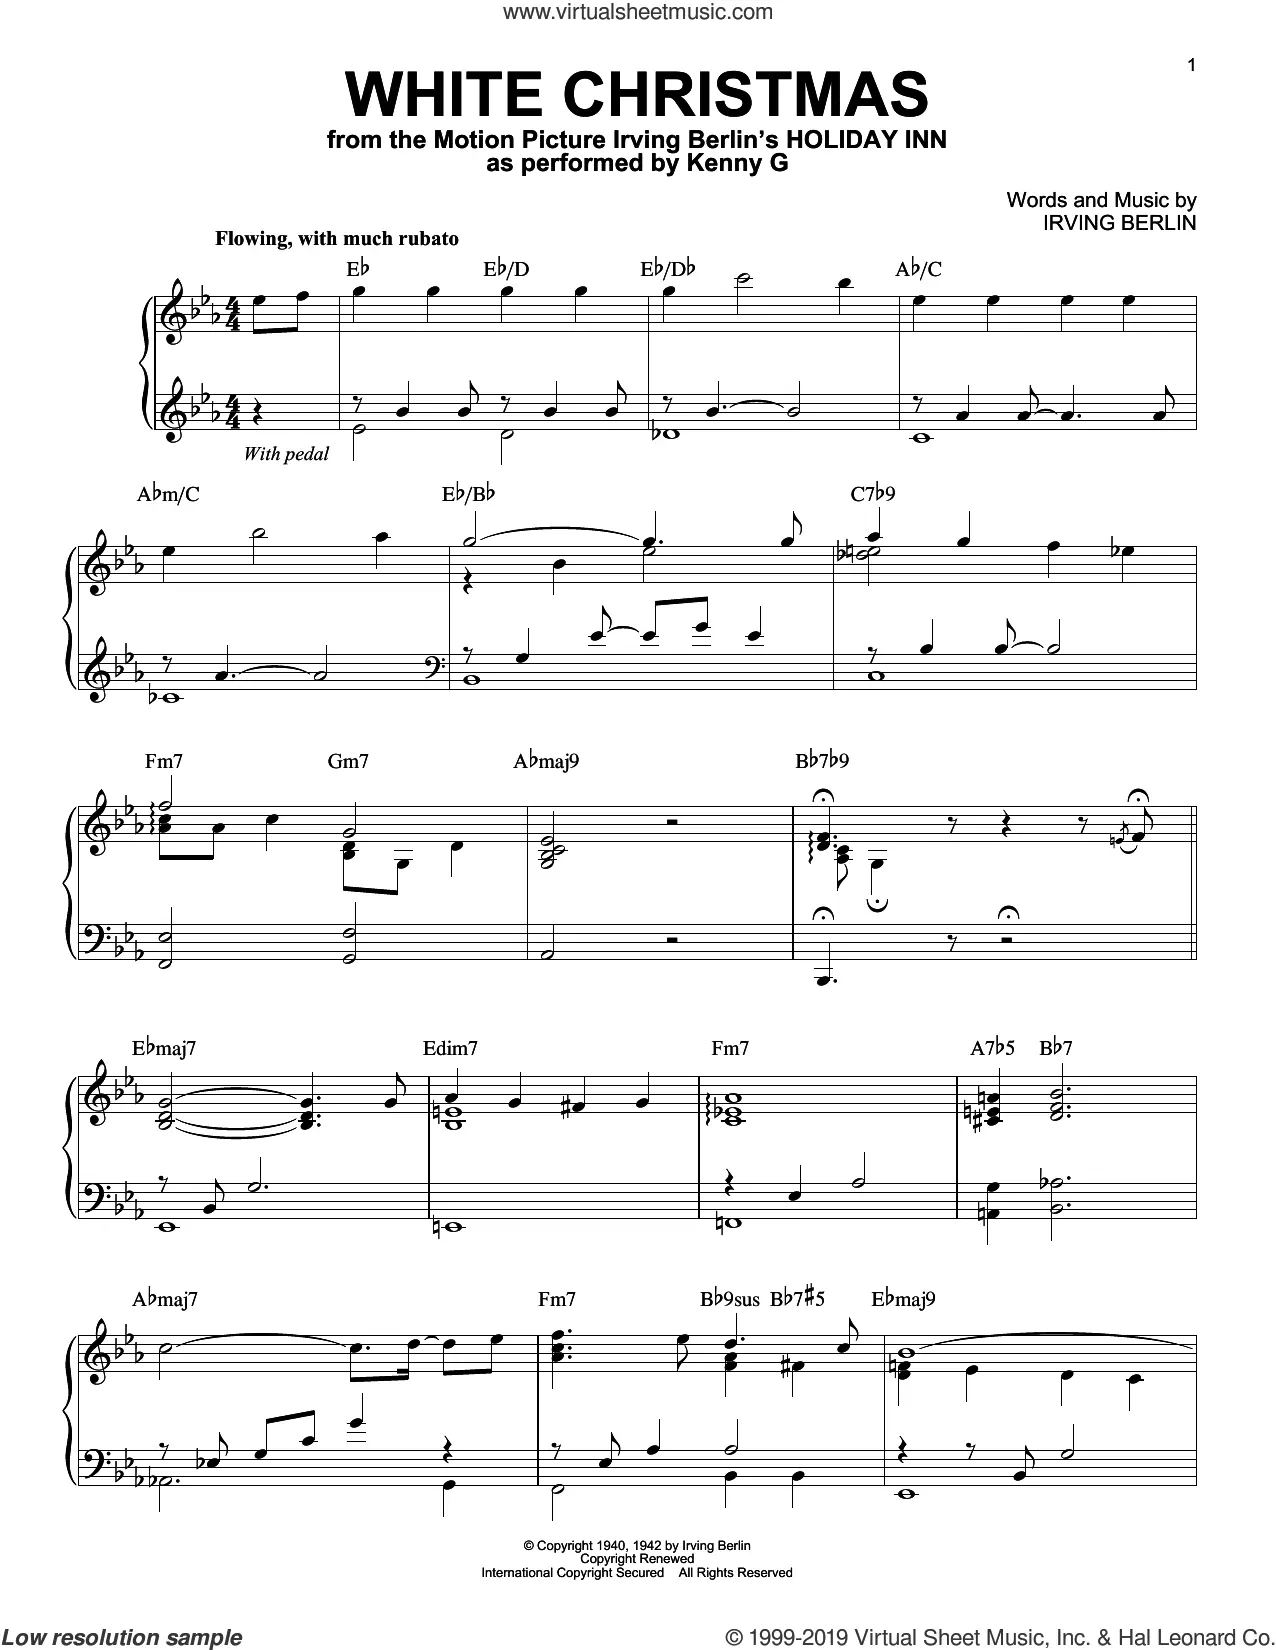 Kenny G Sheet Music to download and print